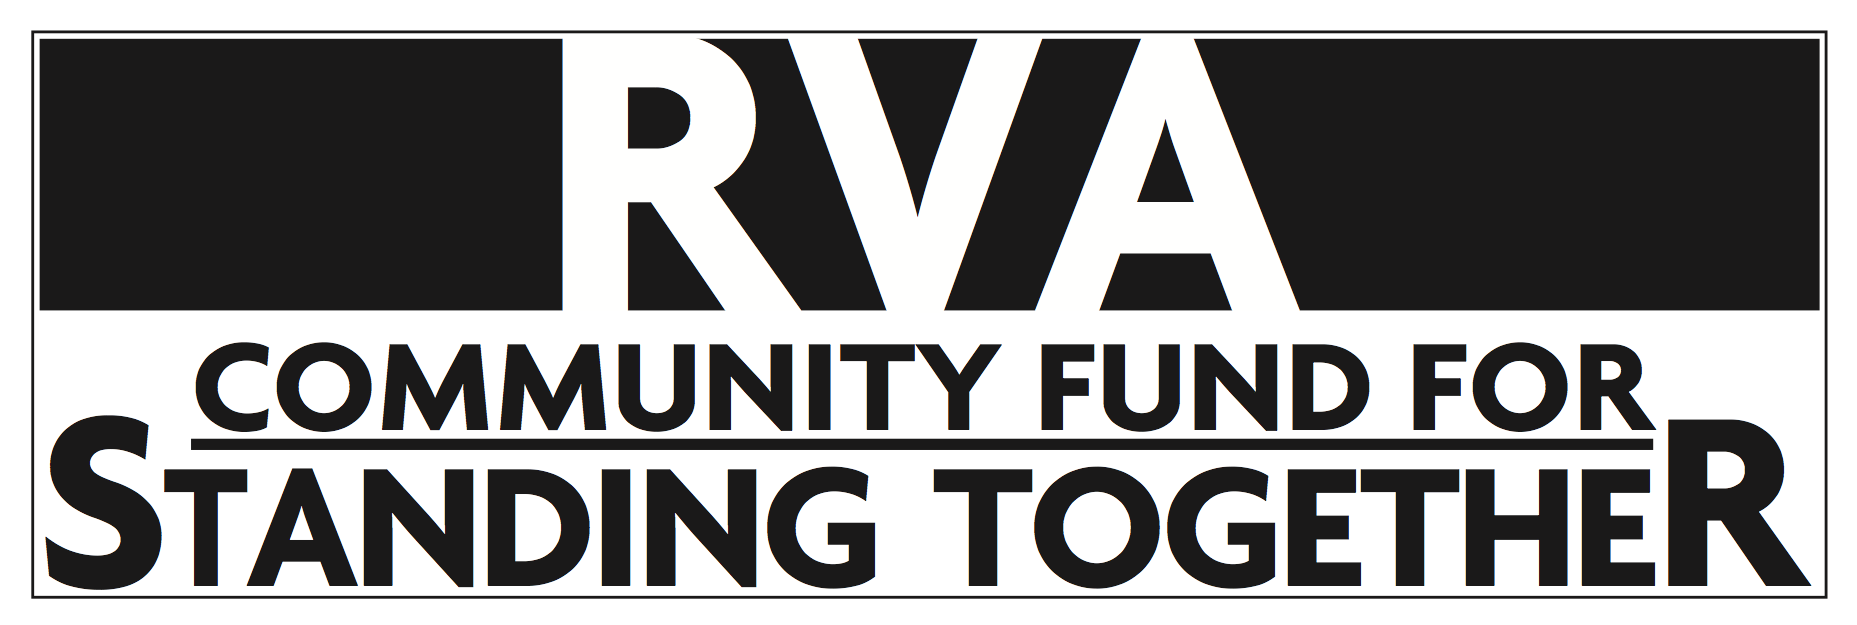 logo for RVA Community Fund for Standing Together